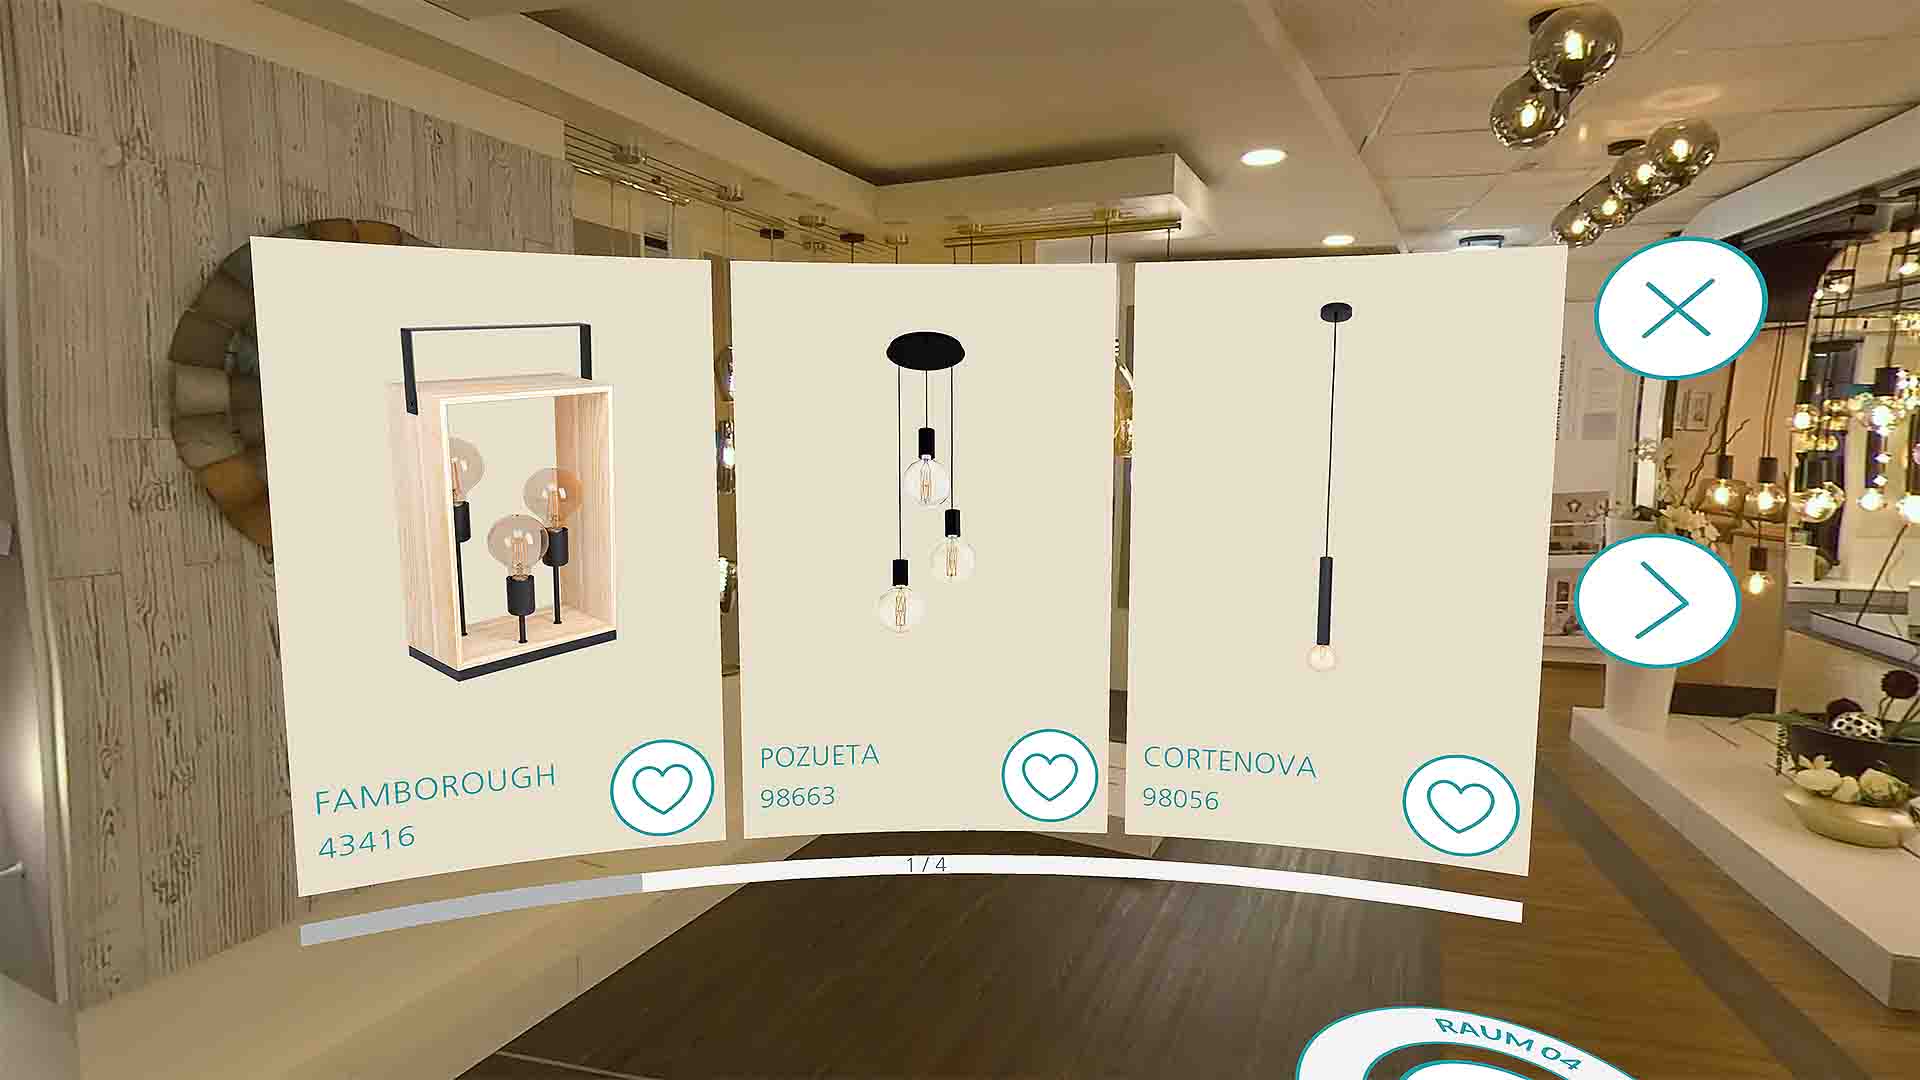 Thanks to Virtual Reality, Eglo’s real exhibition area can be explored digitally and from home.